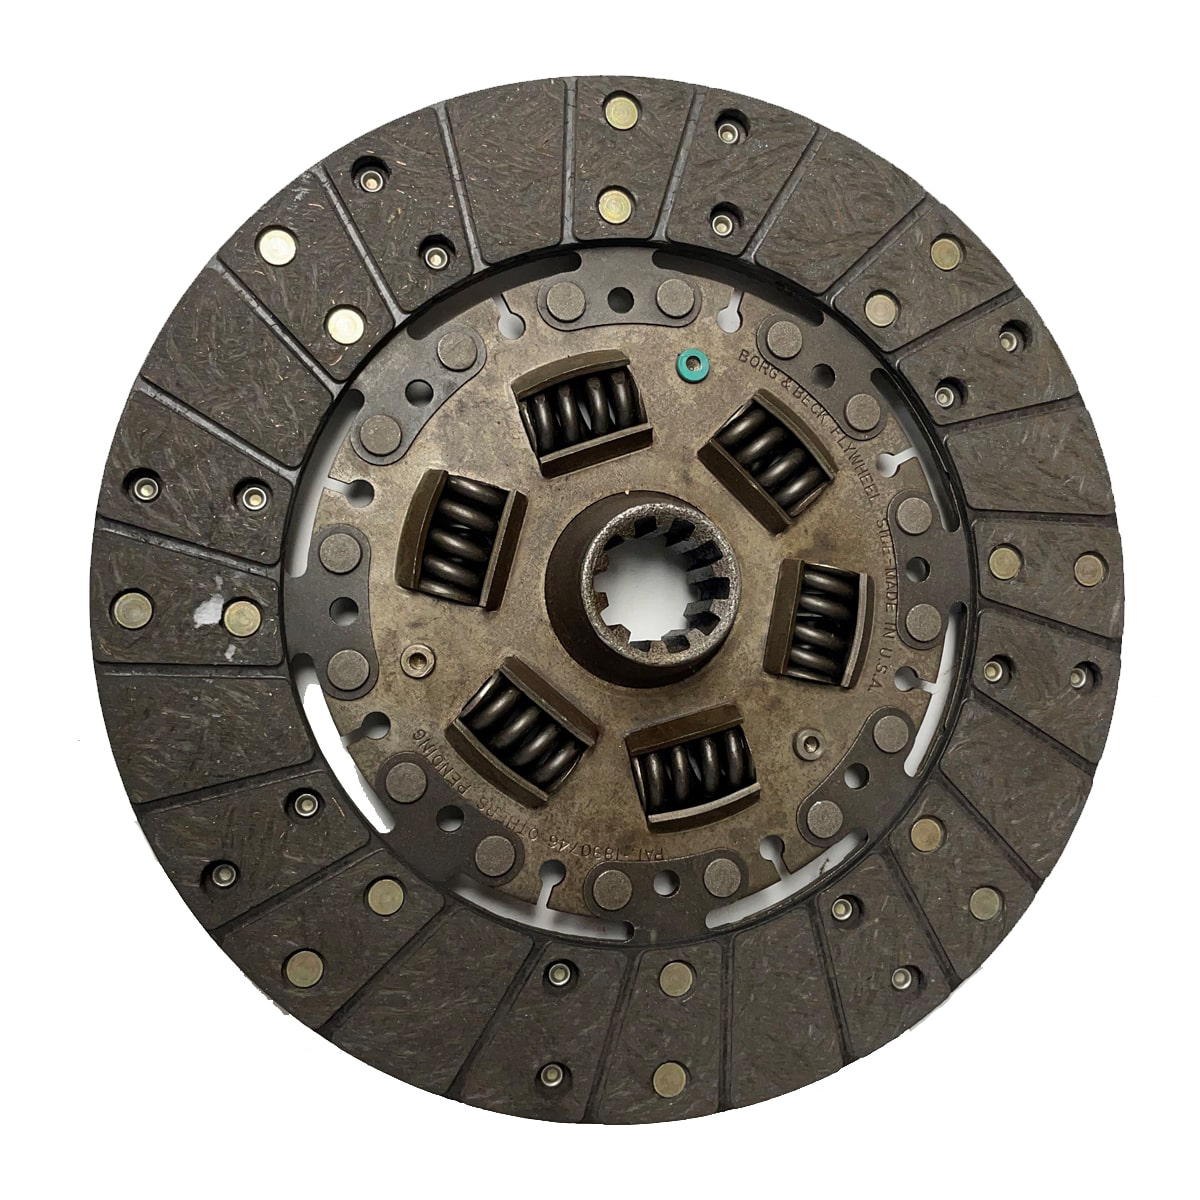 1938-1953 Clutch Disc Rebuilt 9inch General Motors Original Chevrolet and GMC Pickup Truck MUST HAVE YOUR CORE